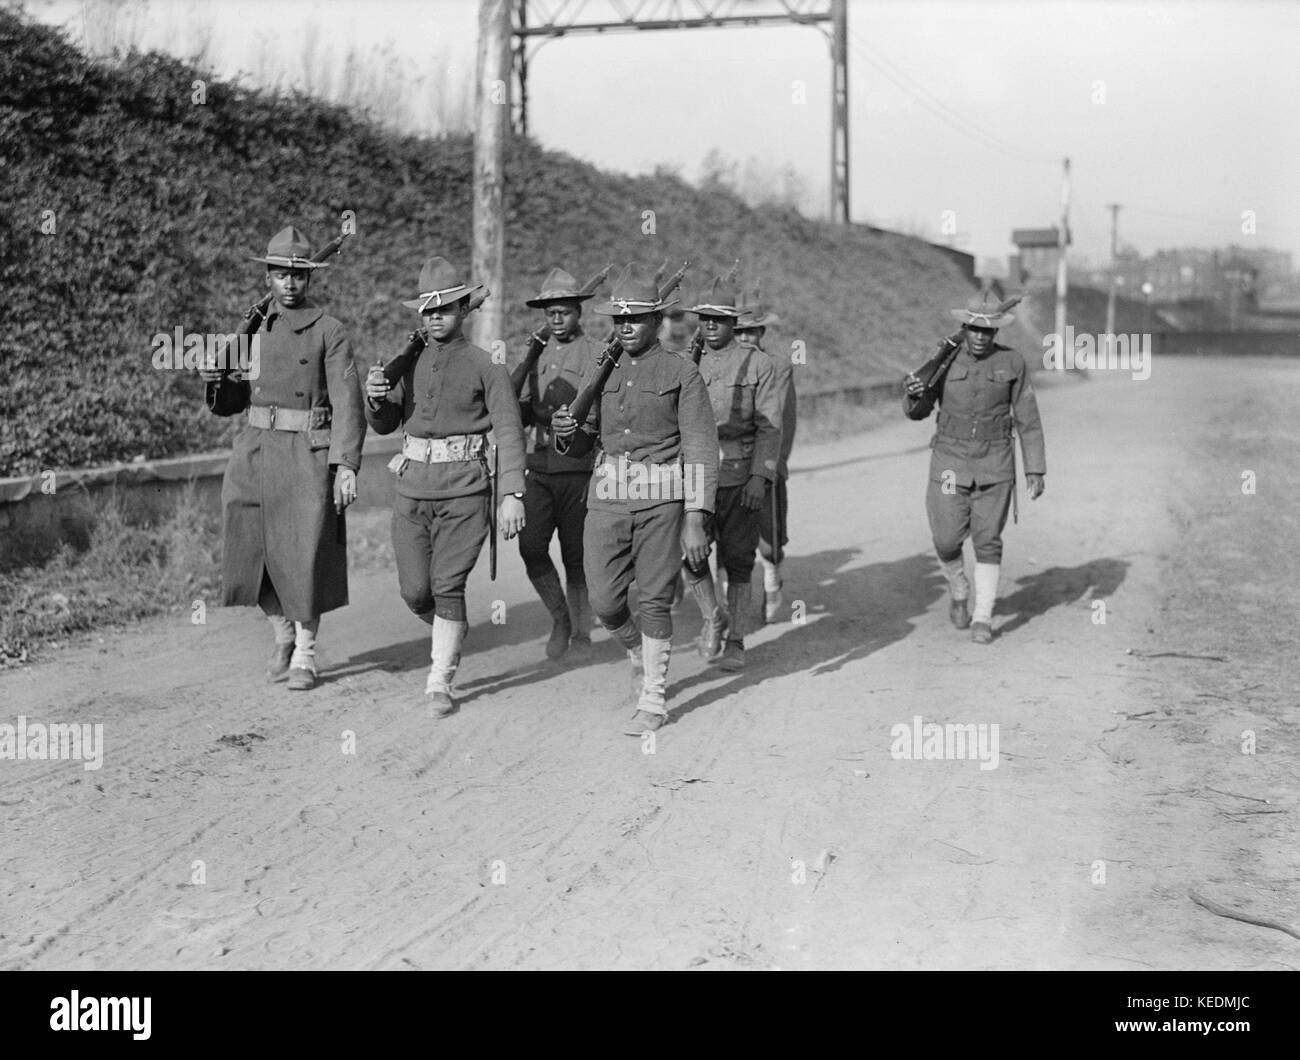 Group of African-American Army Soldiers Marching in Formation,Harris & Ewing,1917 Stock Photo